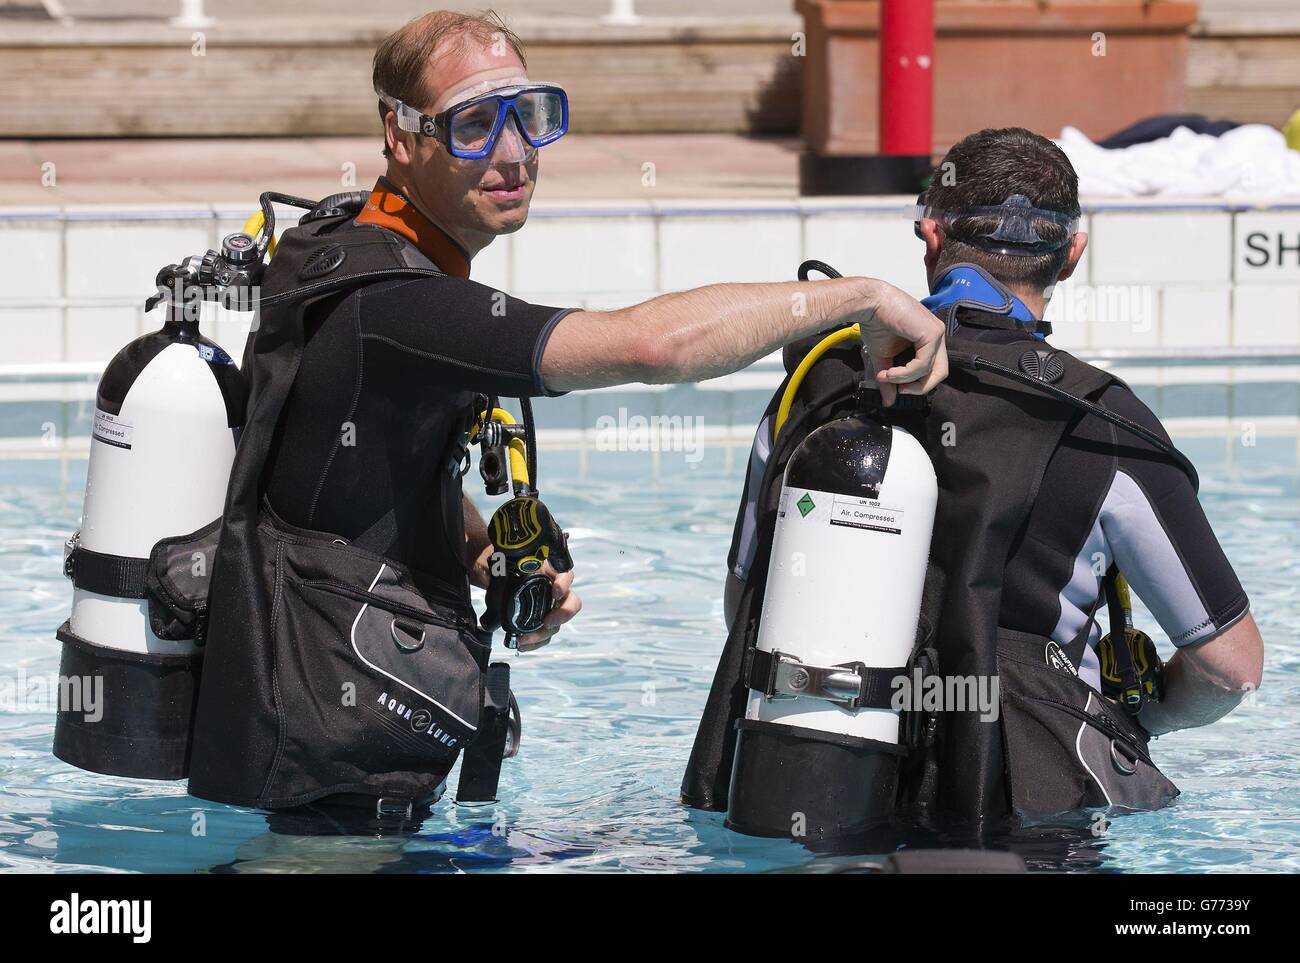 The Duke of Cambridge makes safety checks with BSAC Chairman Eugene Farrell before scuba diving with British Sub-Aqua Club (BSAC) members at a swimming pool in London. Stock Photo